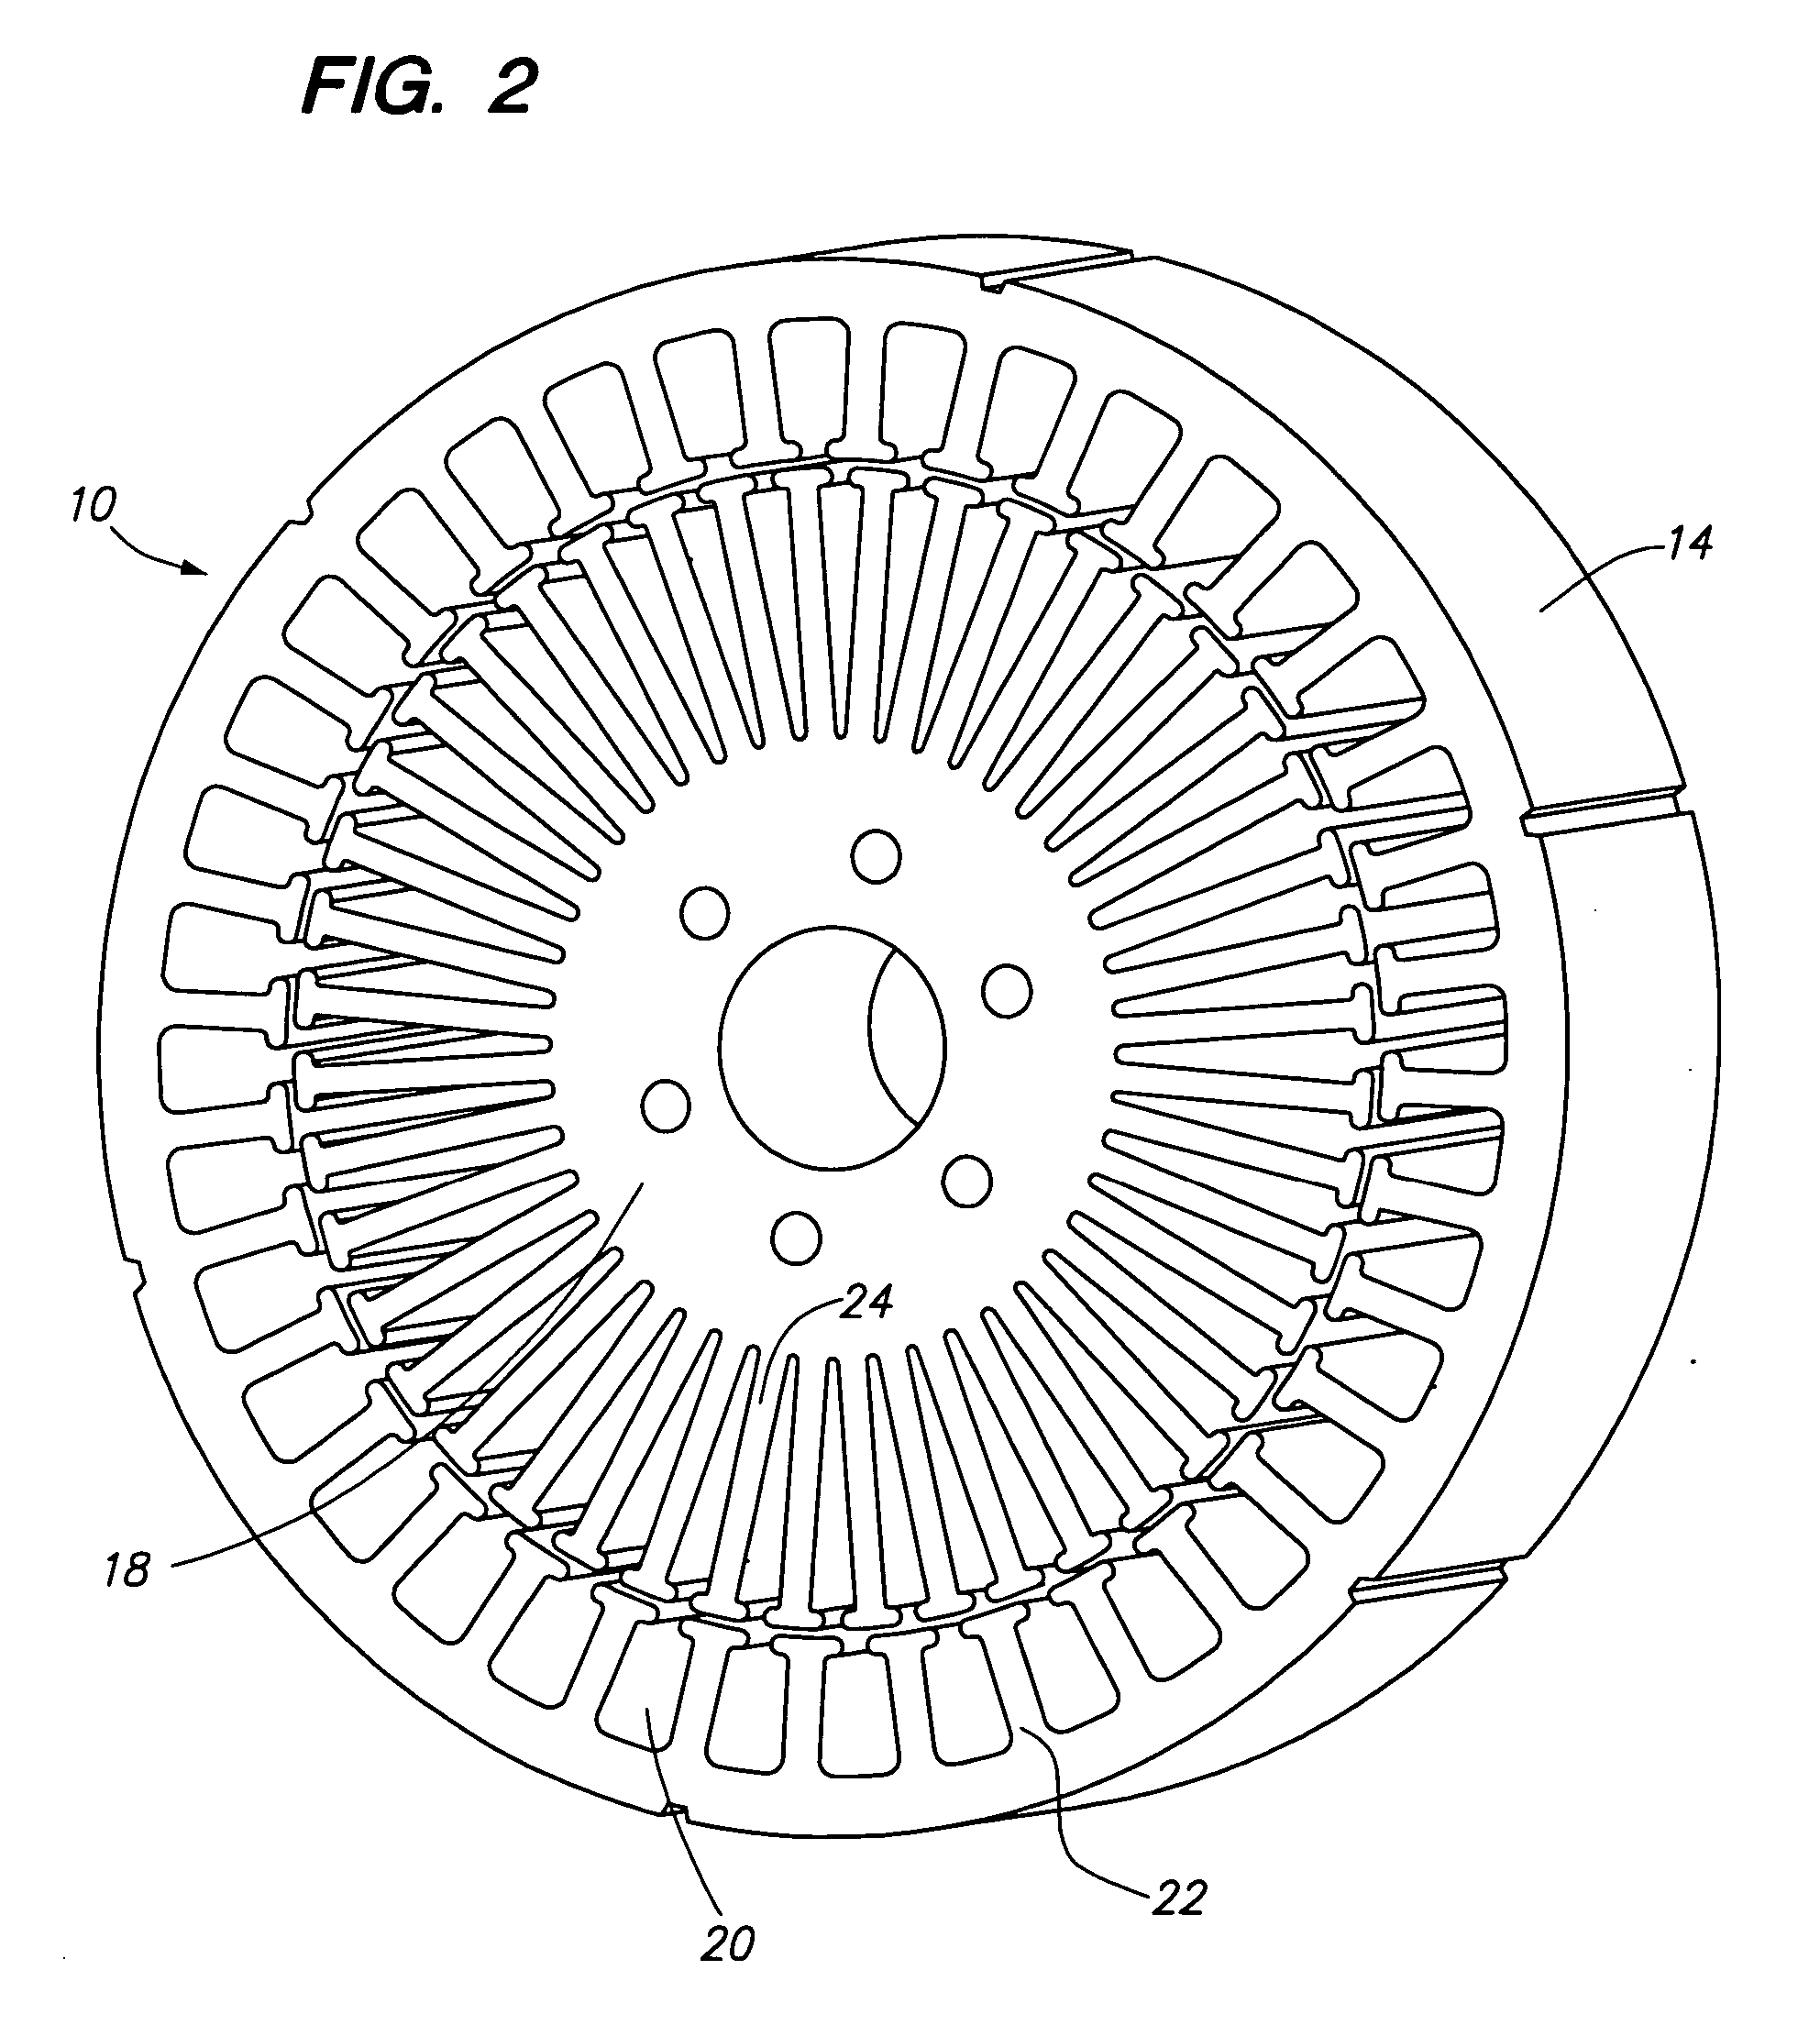 AC induction motor having multiple poles and increased stator/rotor gap